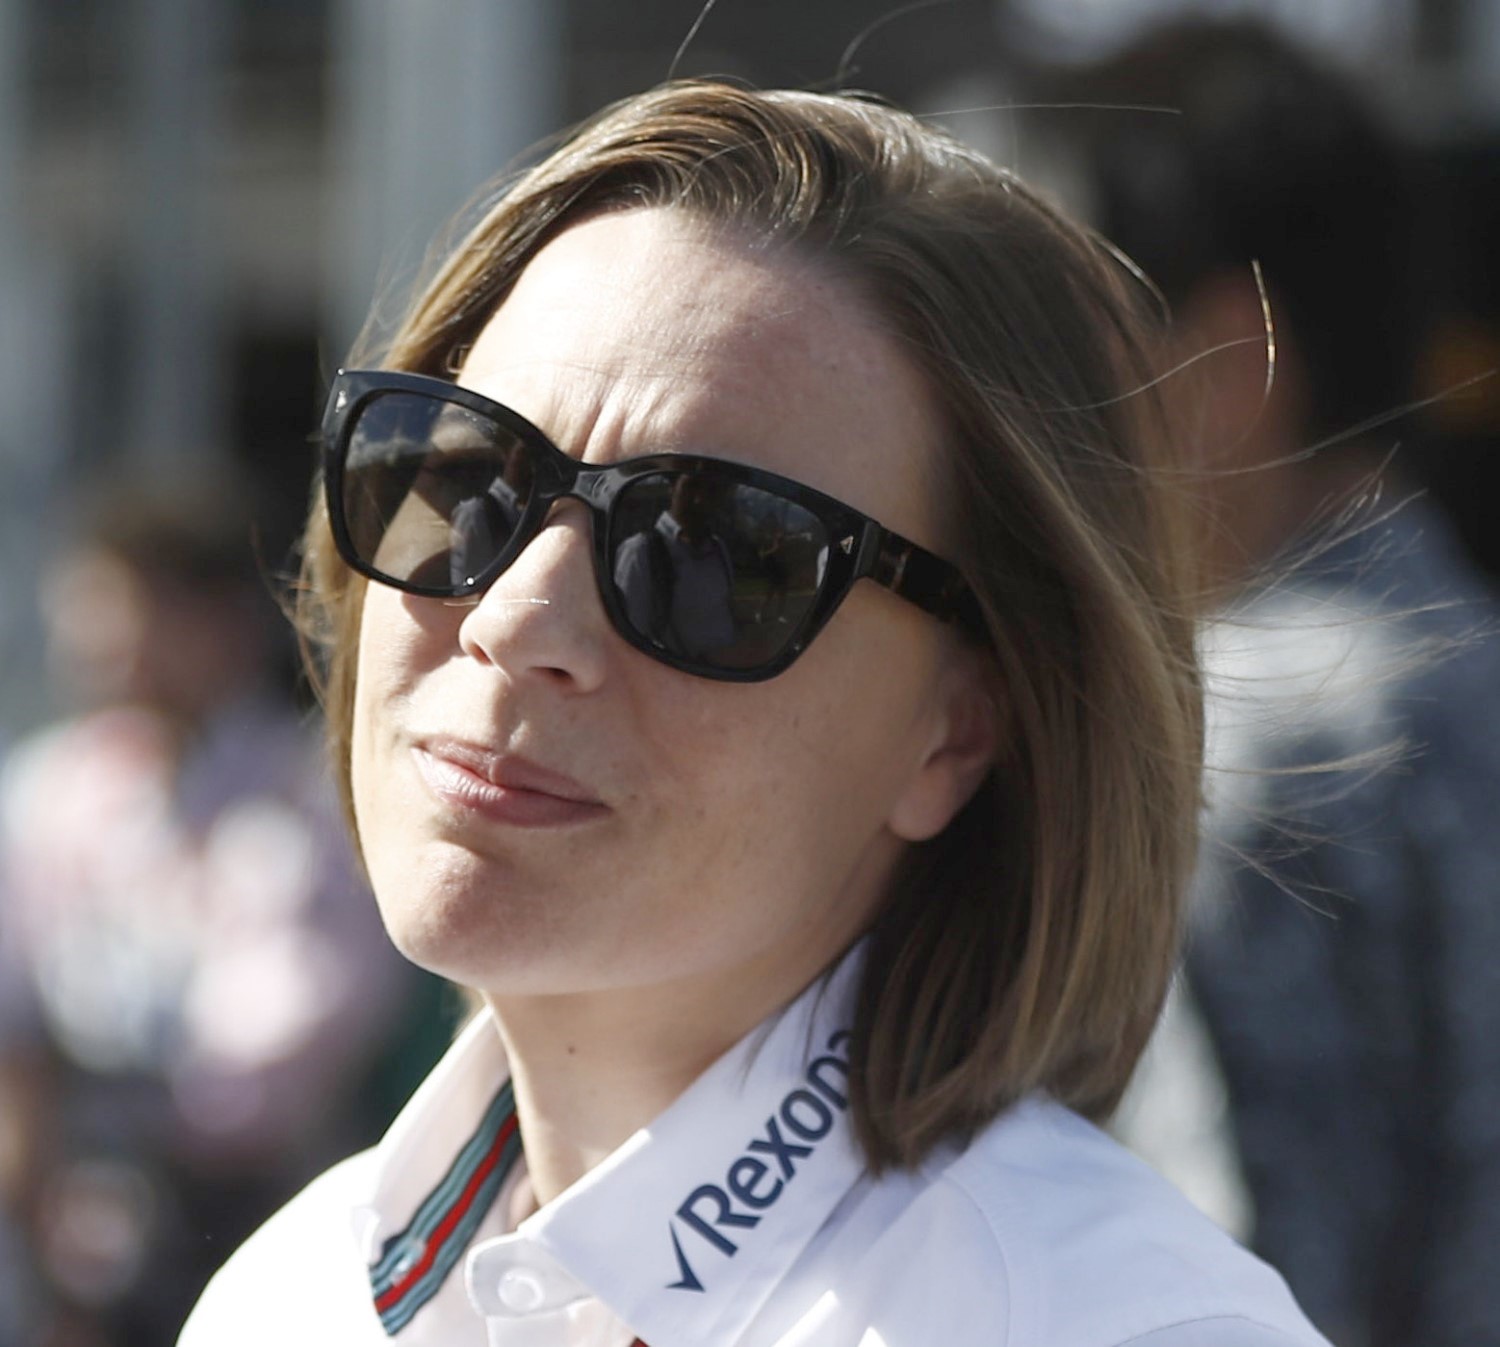 Claire Williams says Paddy Lowe's car is 'evil' to drive. He can't ride Aldo Costa's coattails anymore